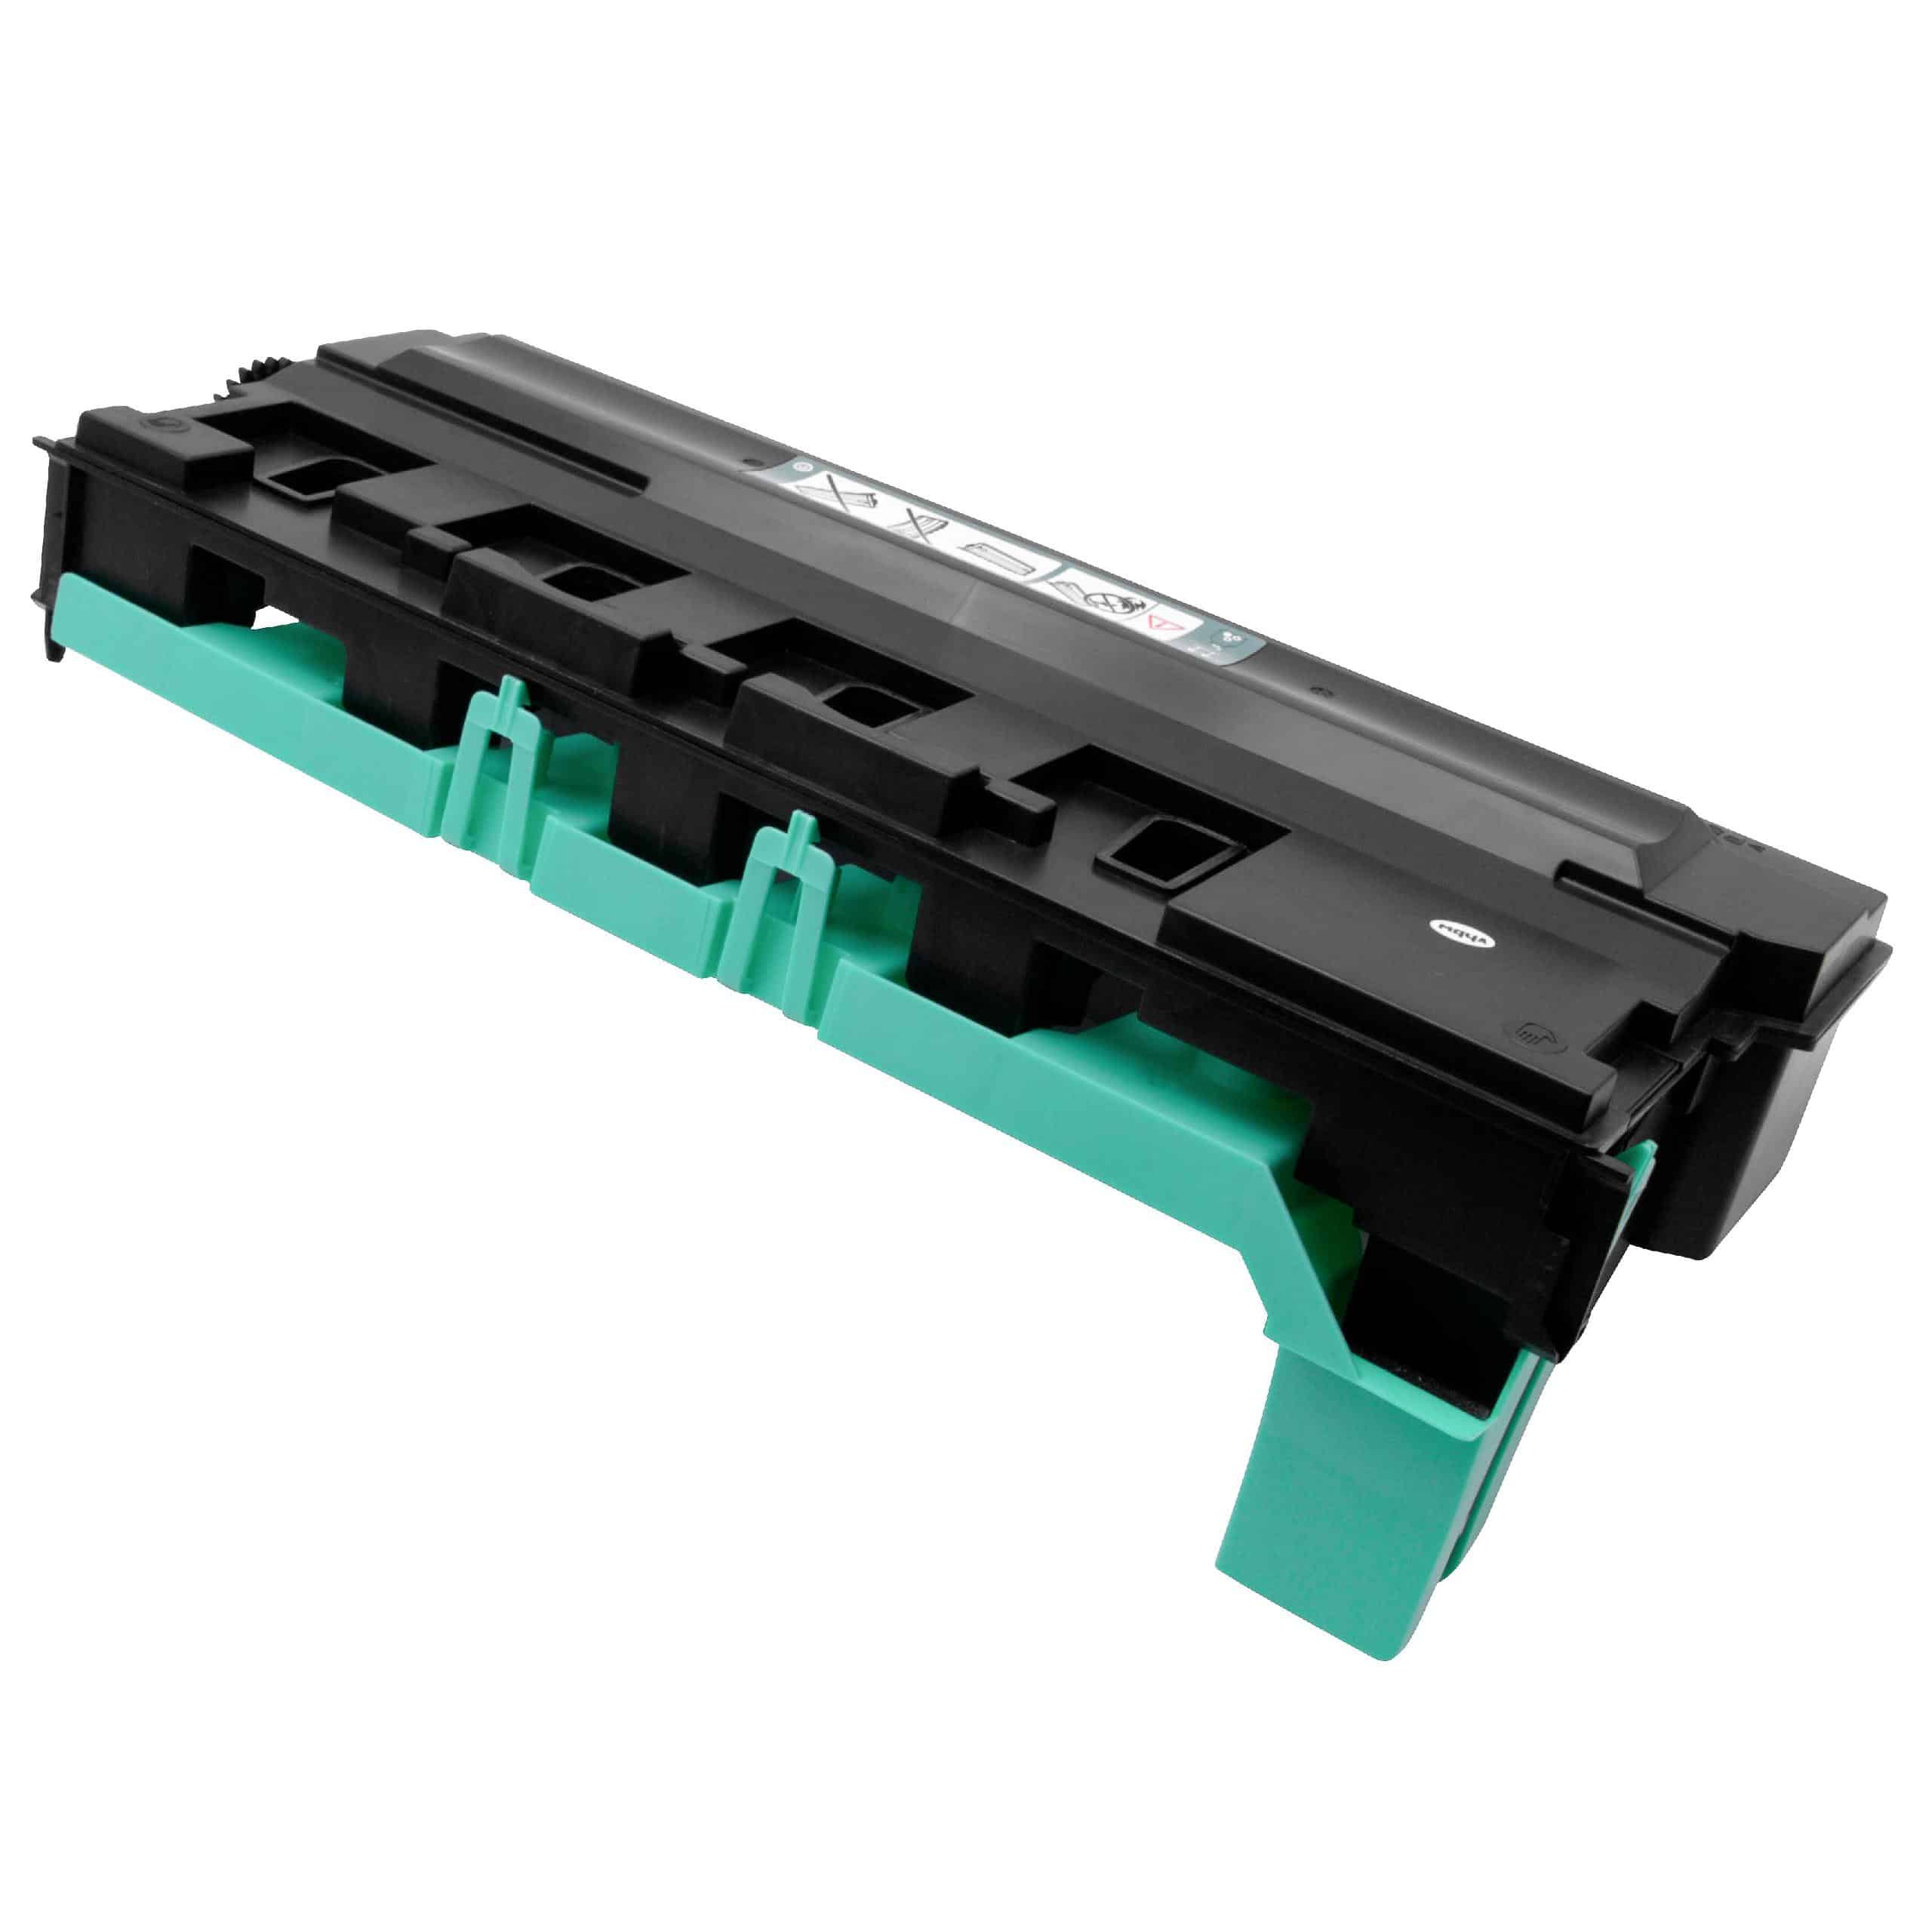 Waste Toner Container as Replacement for Konica Minolta WX-105, A8JJ-WY1 - Black